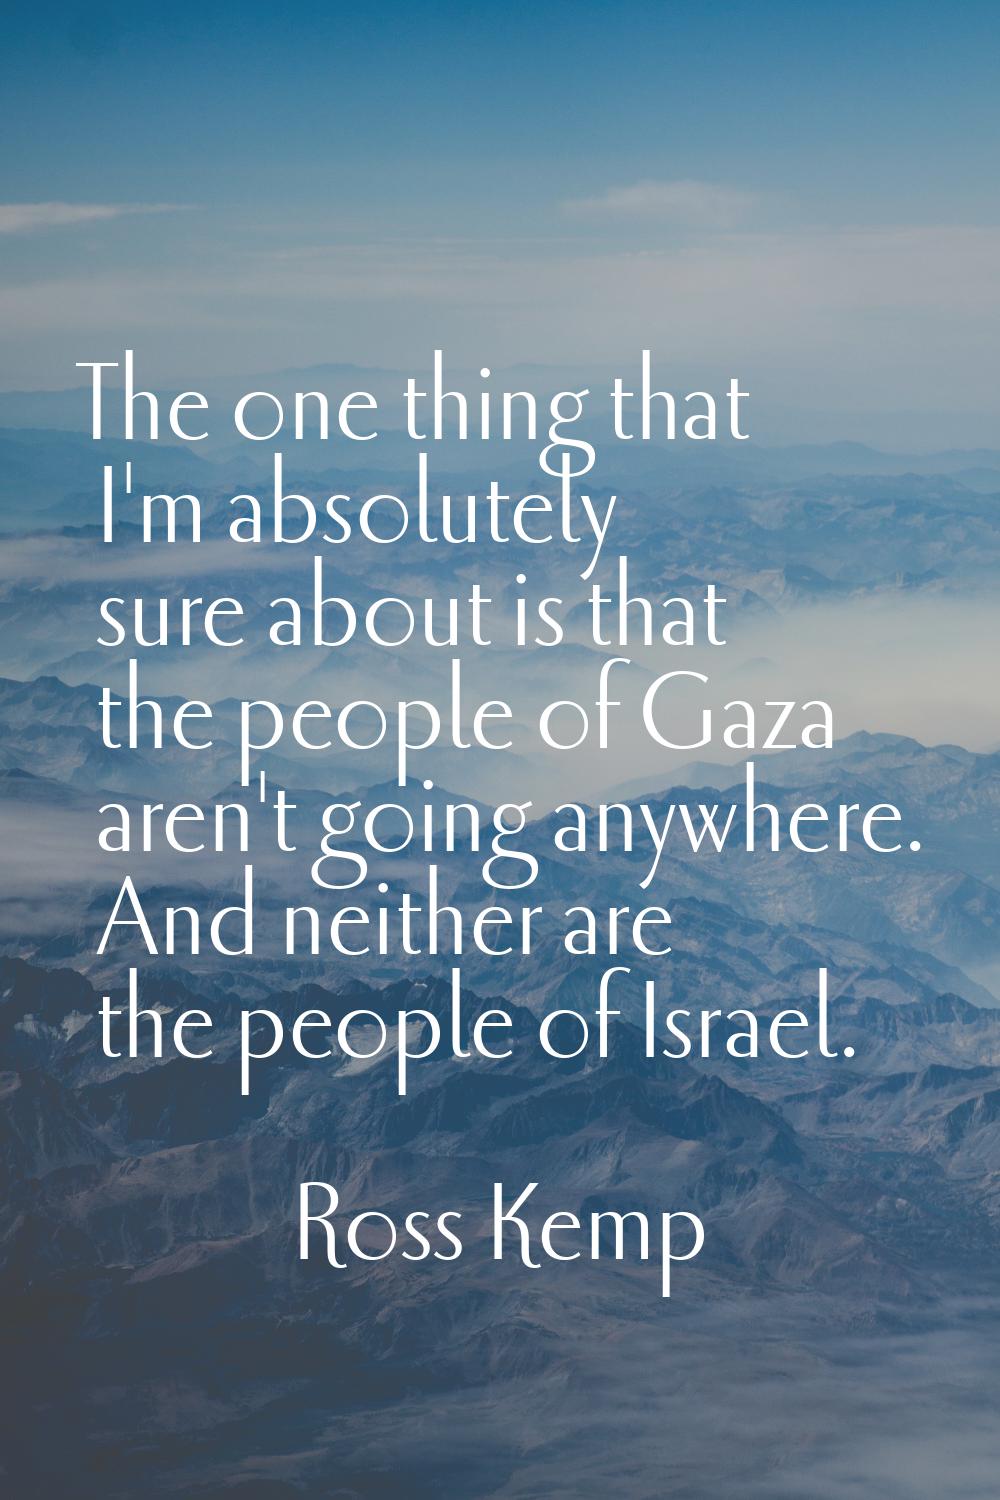 The one thing that I'm absolutely sure about is that the people of Gaza aren't going anywhere. And 